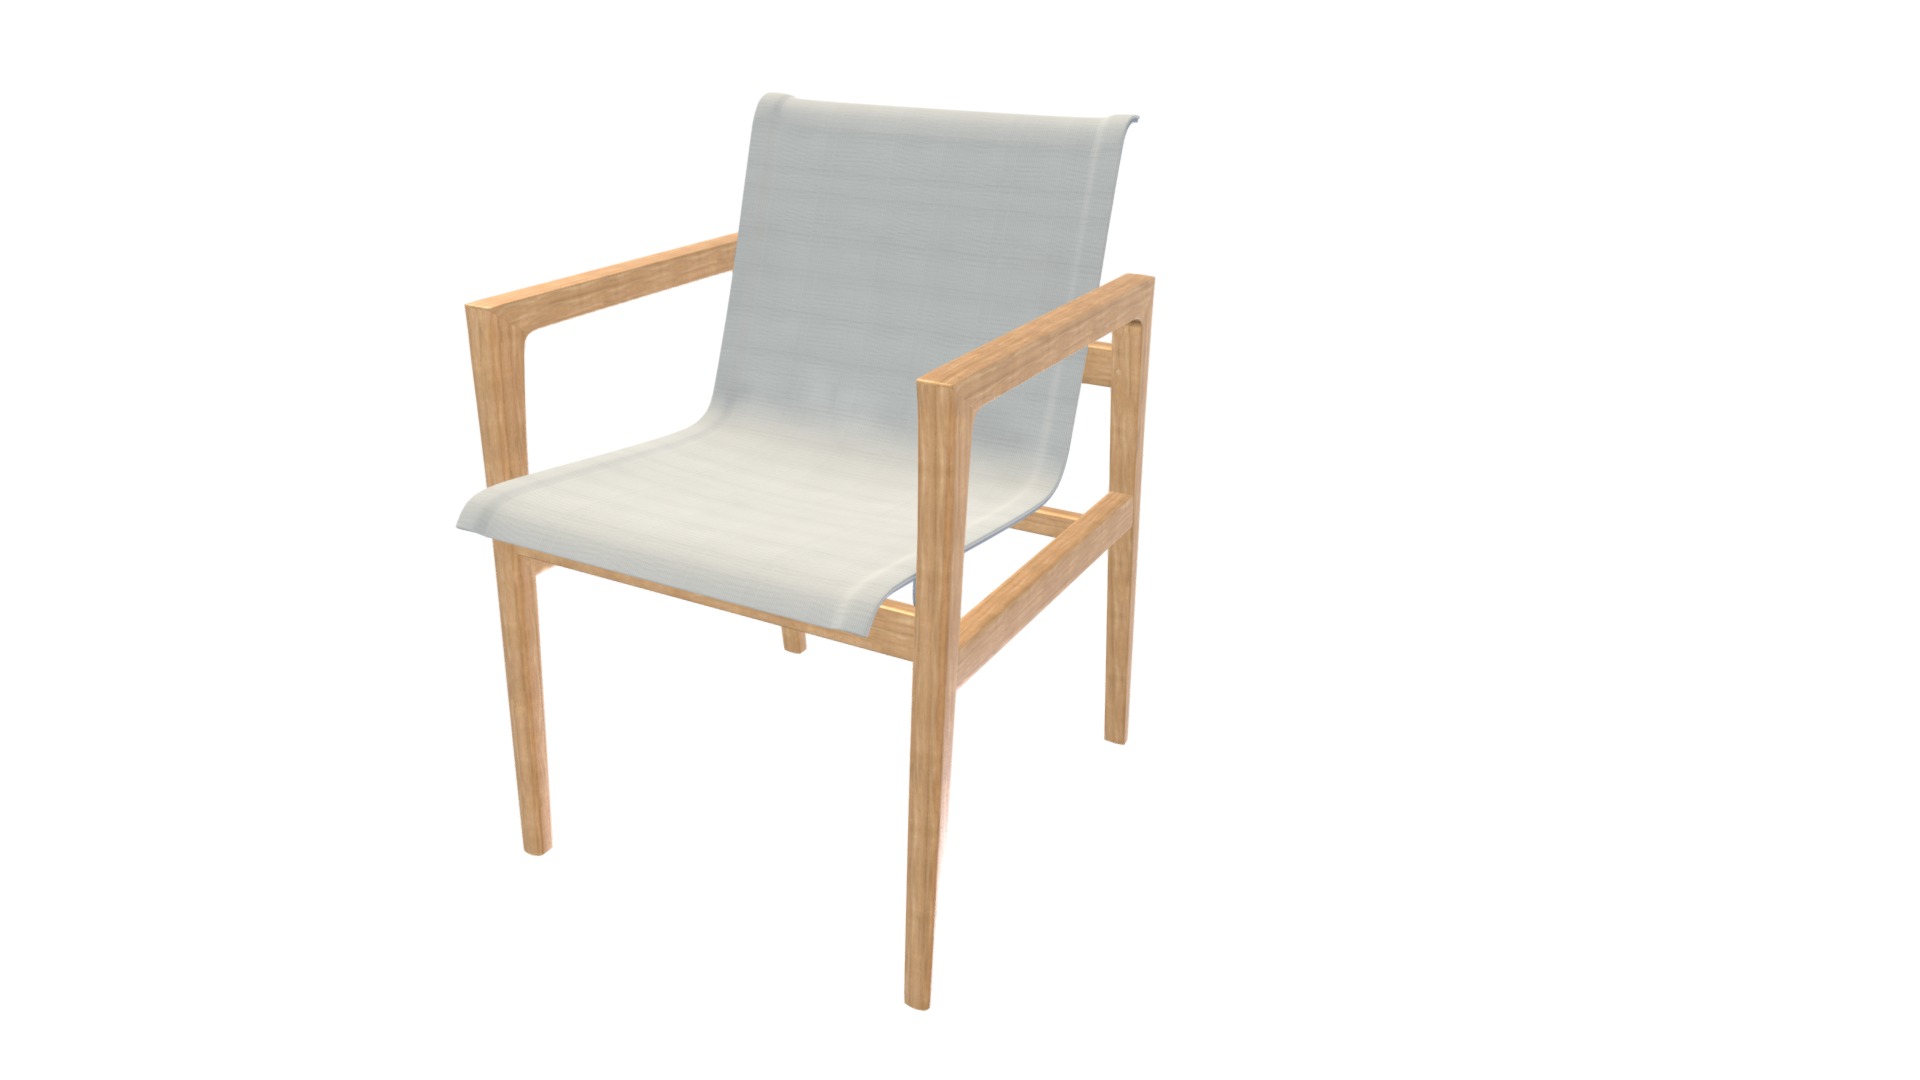 3D model Arm Chair - This is a 3D model of the Arm Chair. The 3D model is about a wooden chair with a cushion.